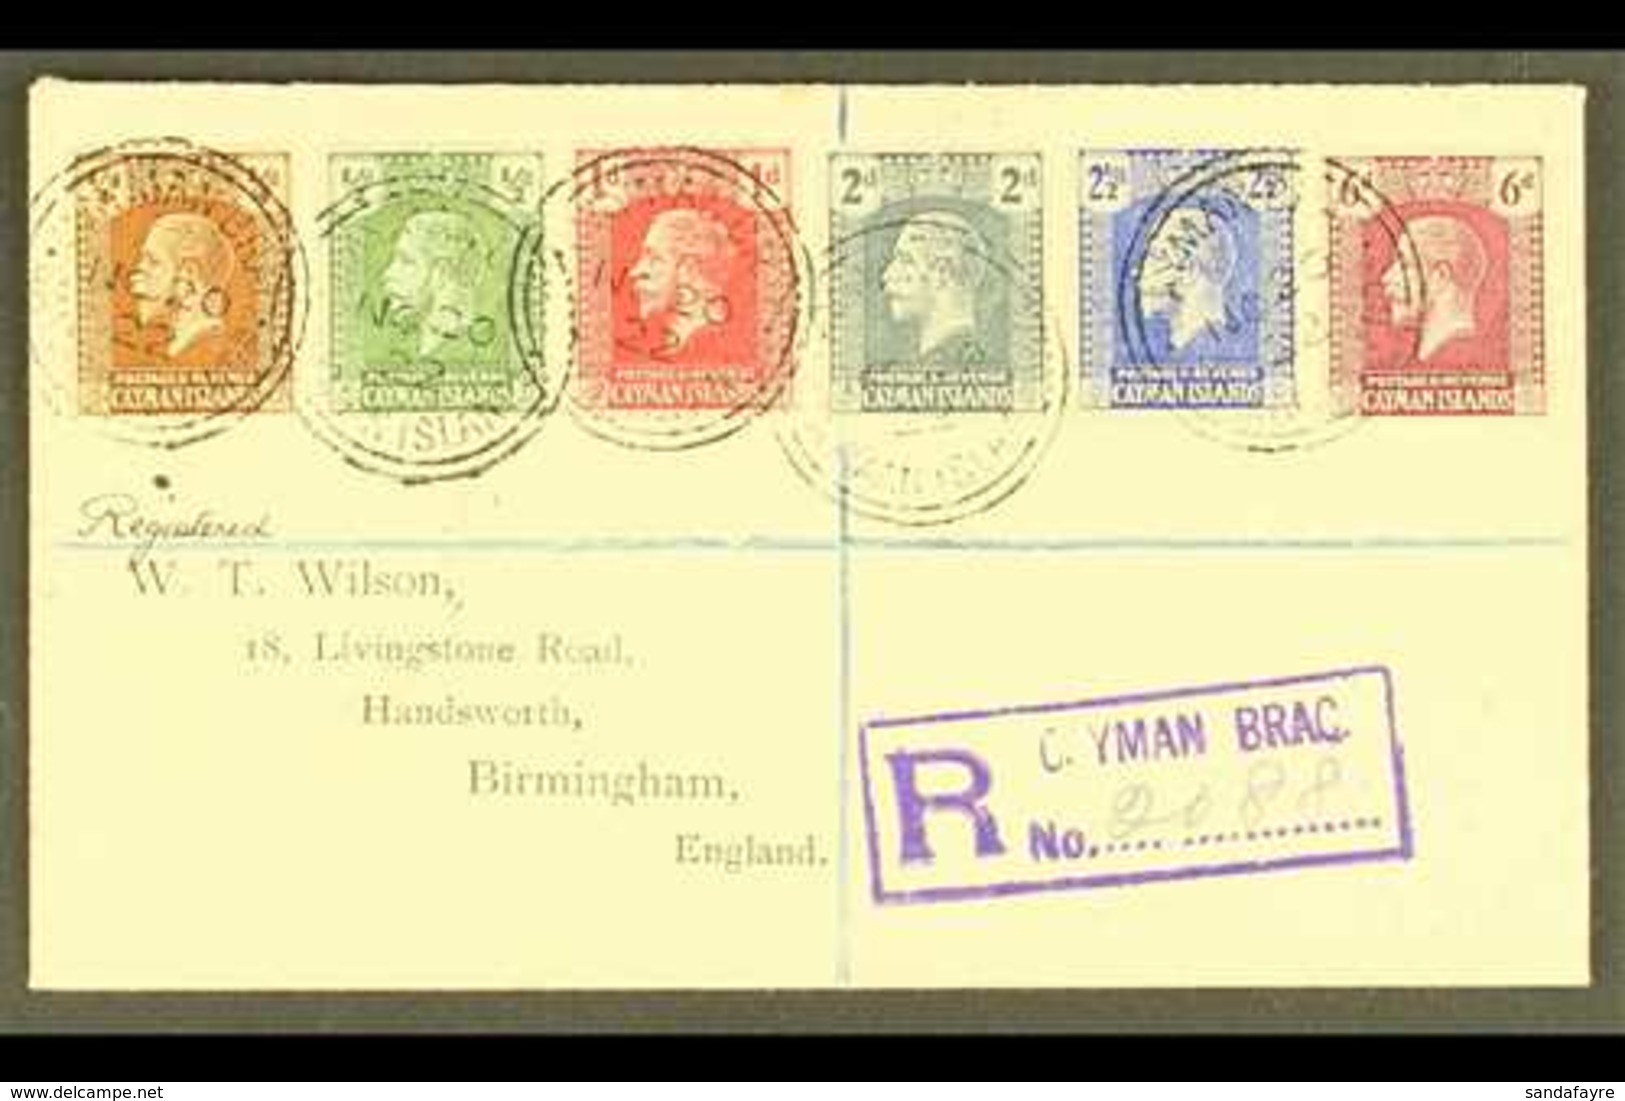 1922 (Nov) Attractive "Wilson" Registered Cover To England, Bearing 1921-26 ¼d, ½d, 1d, 2d, 2½d And 6d Tied CAYMAN BRAC  - Cayman Islands